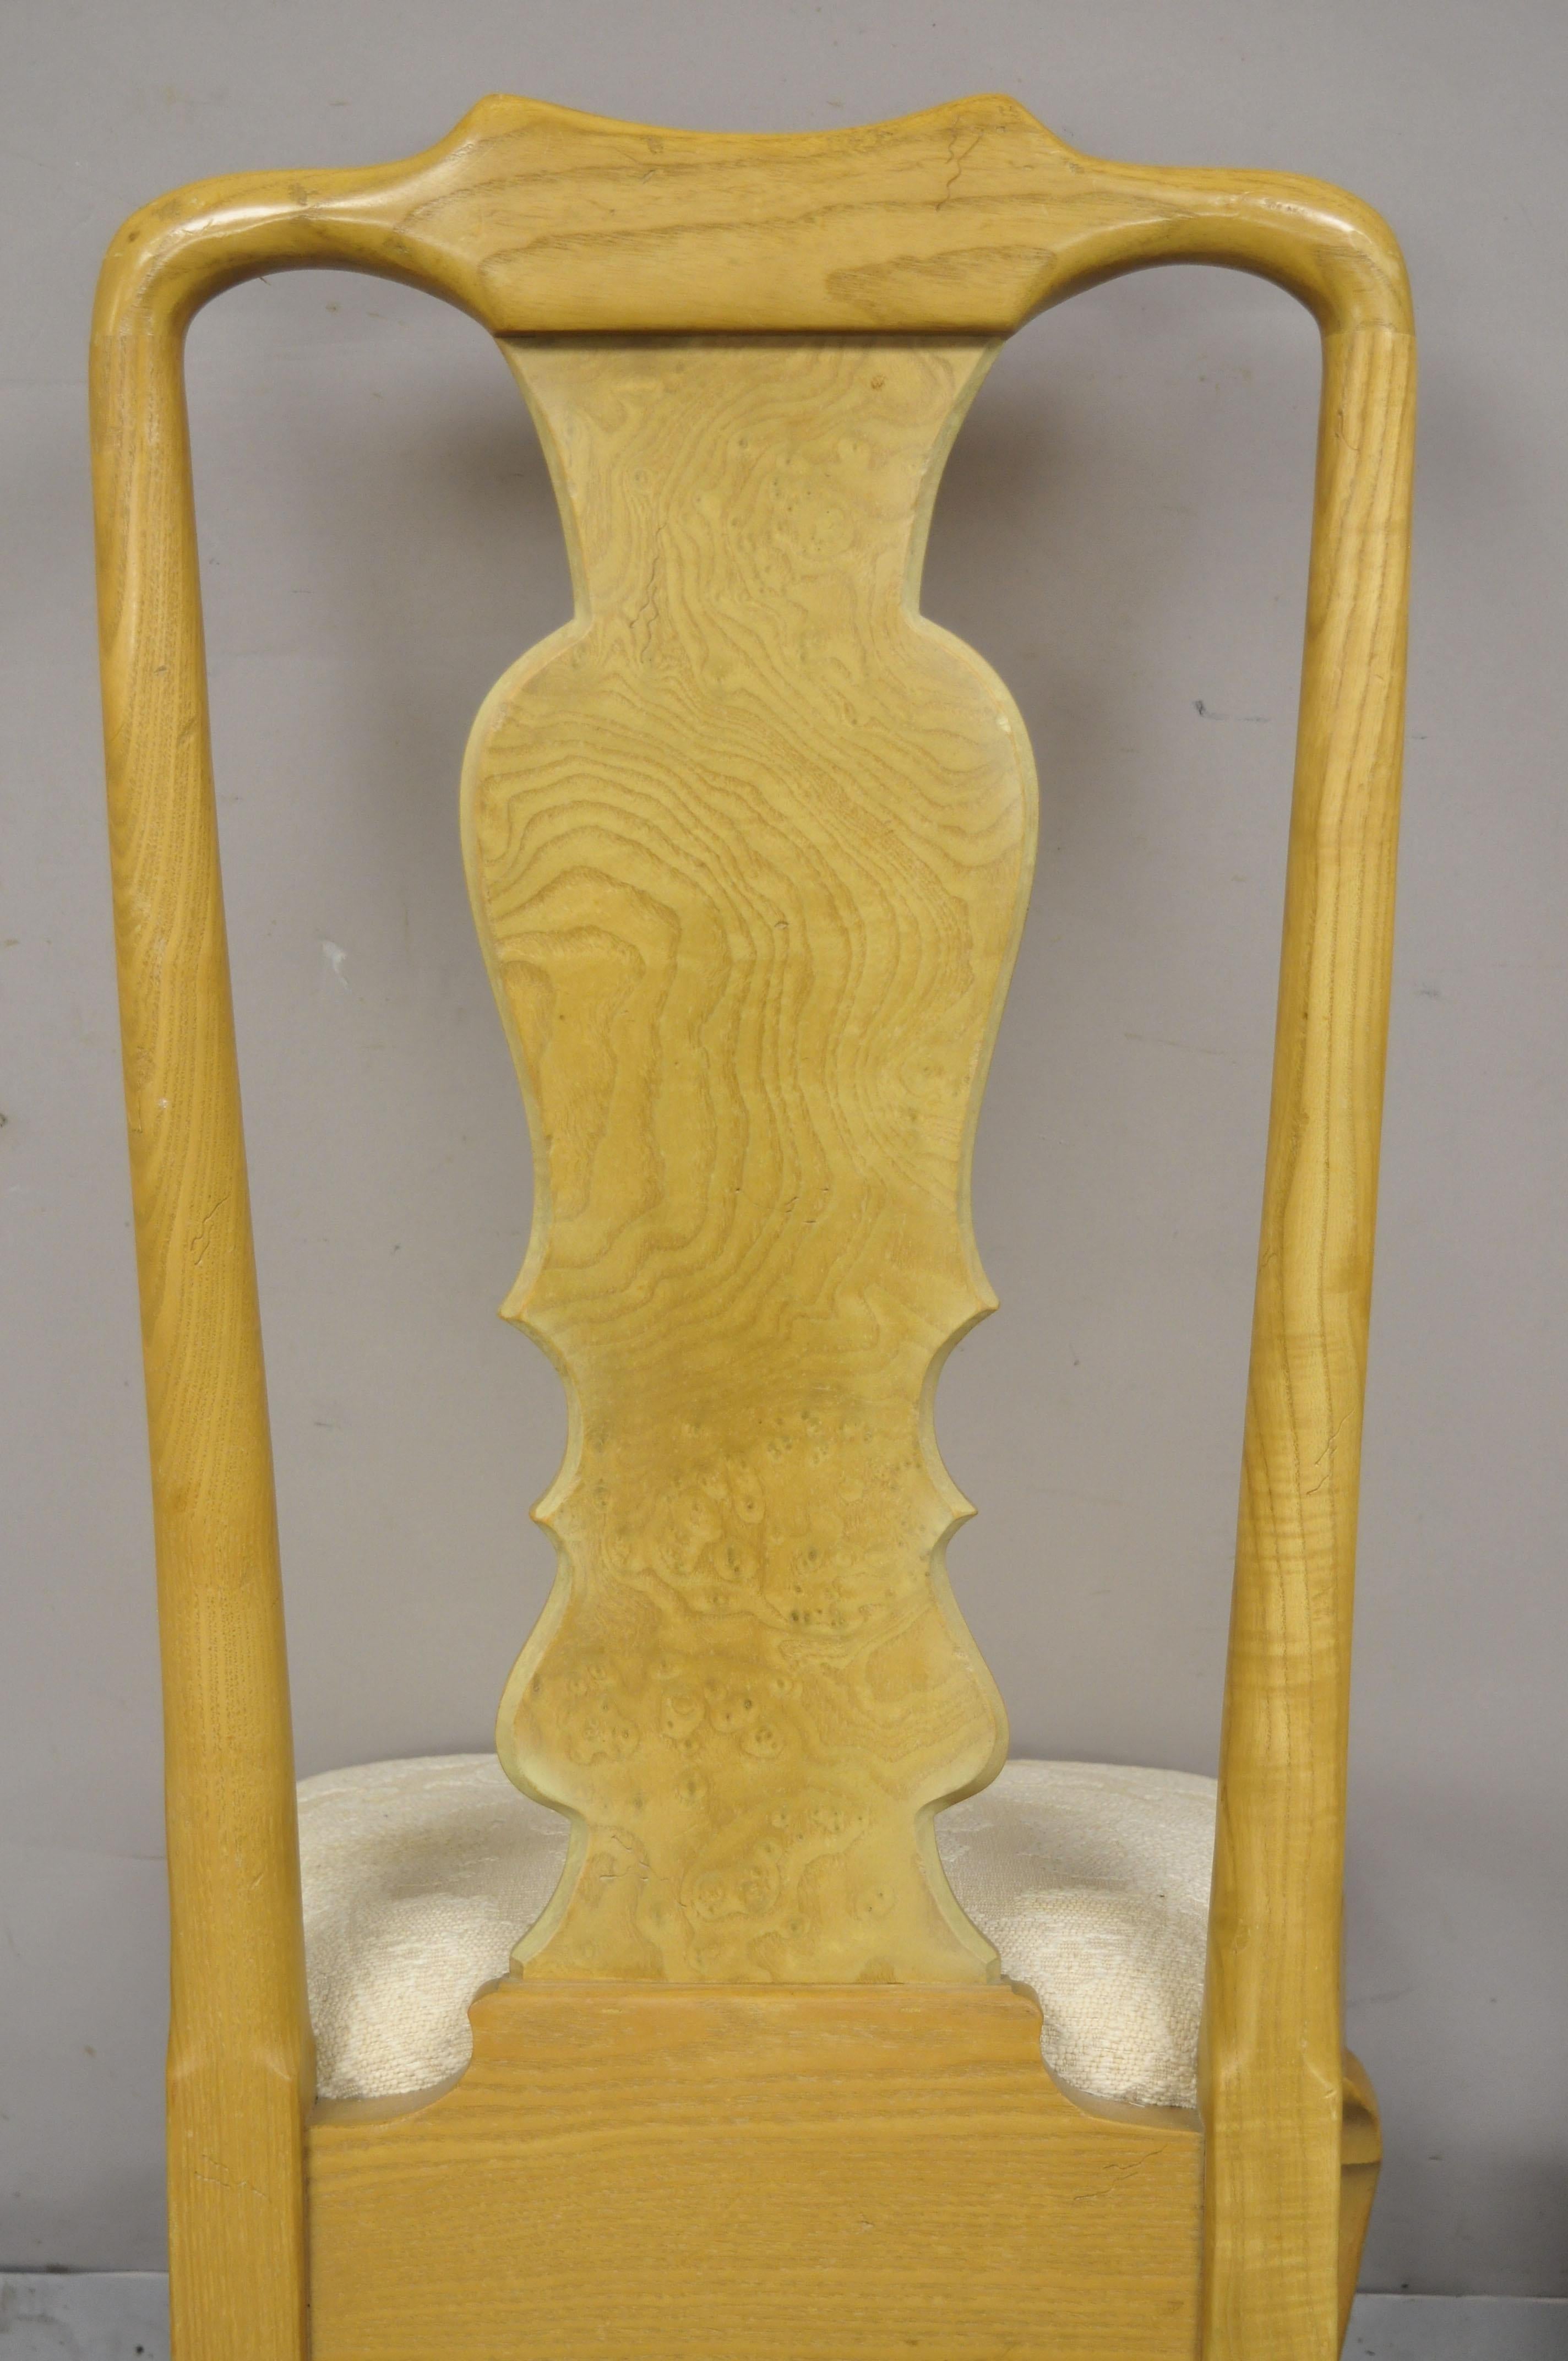 20th Century Vintage Henredon Yellow Burl Wood Queen Anne Dining Chairs, Set of 4